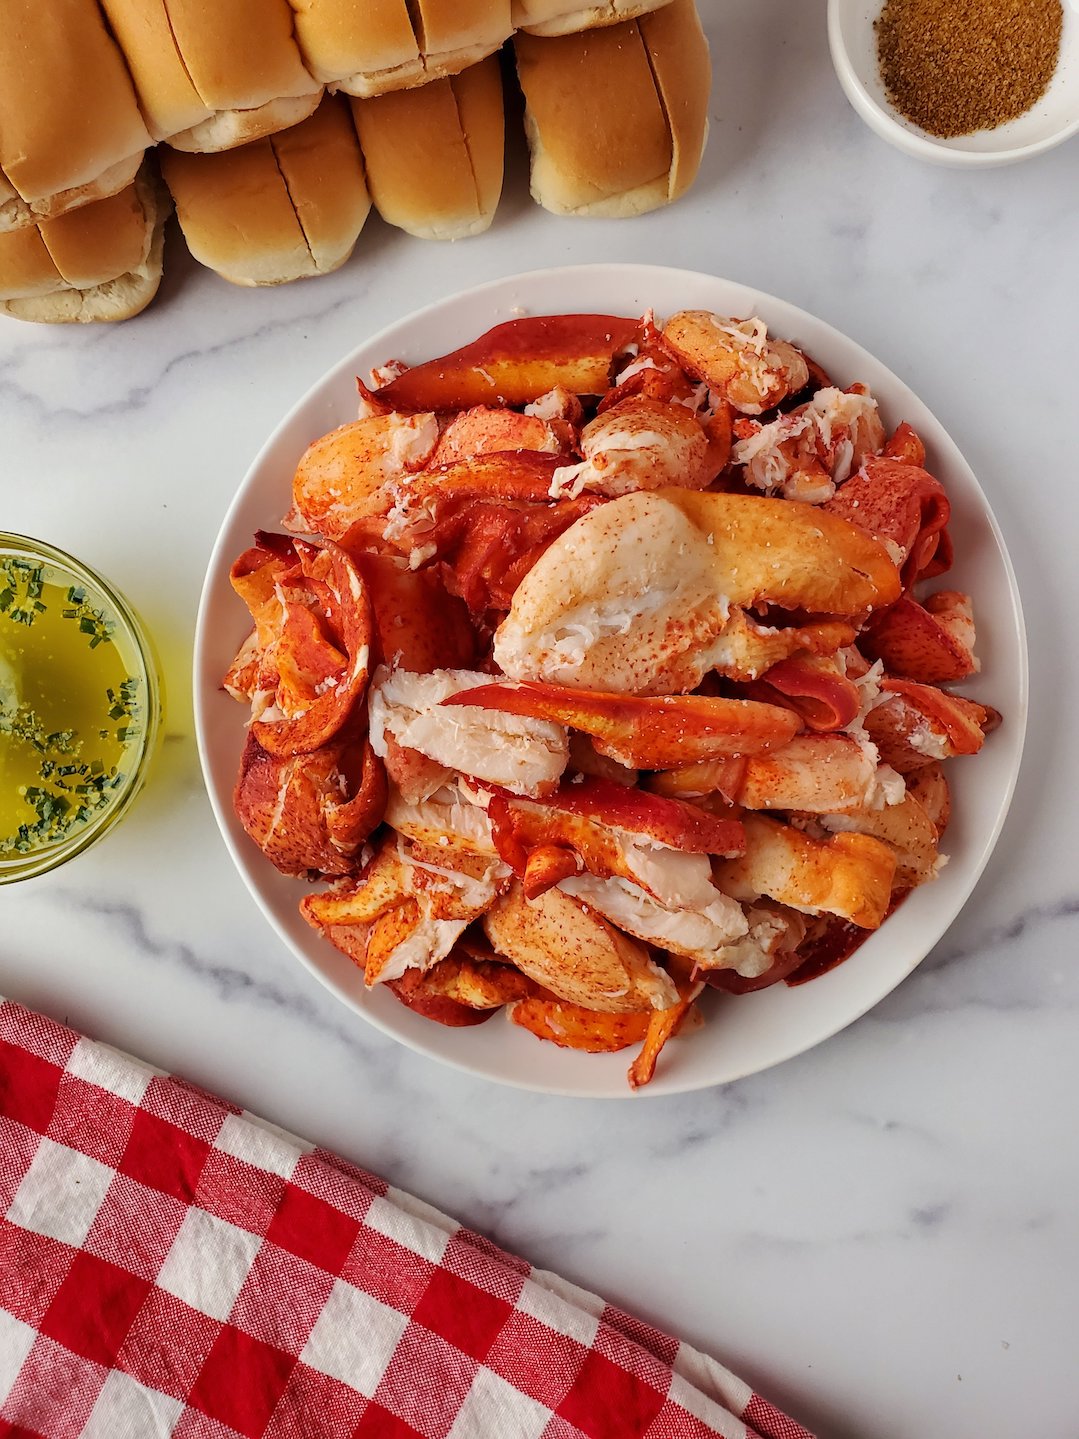 Get The Best Maine Lobster Meat And Brioche Roll Kit For A Great Party Snack